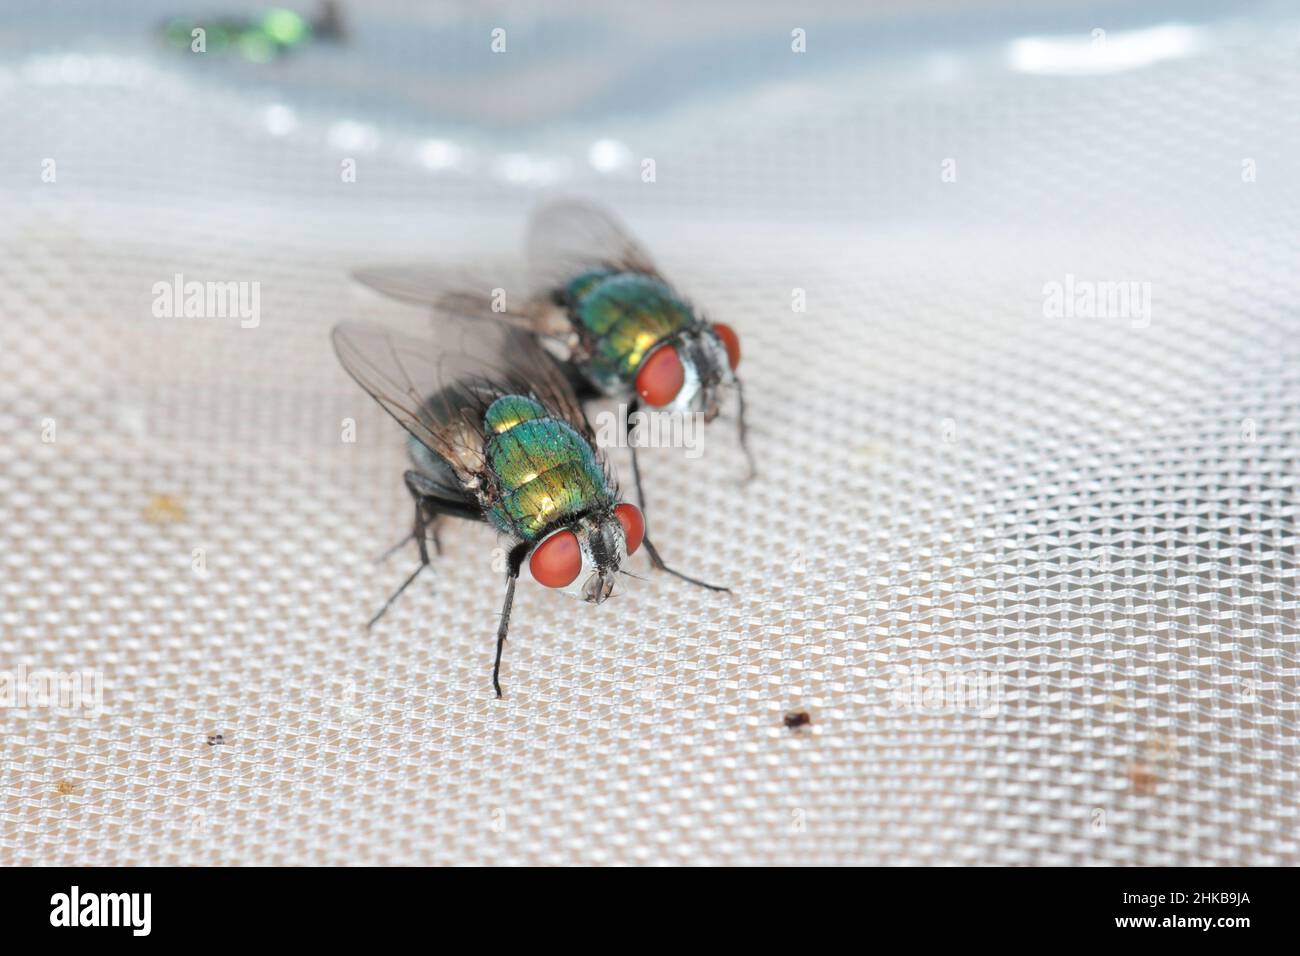 Fly Lucilia caesar common greenbottle blowfly Diptera in close up view while laying eggs. Stock Photo